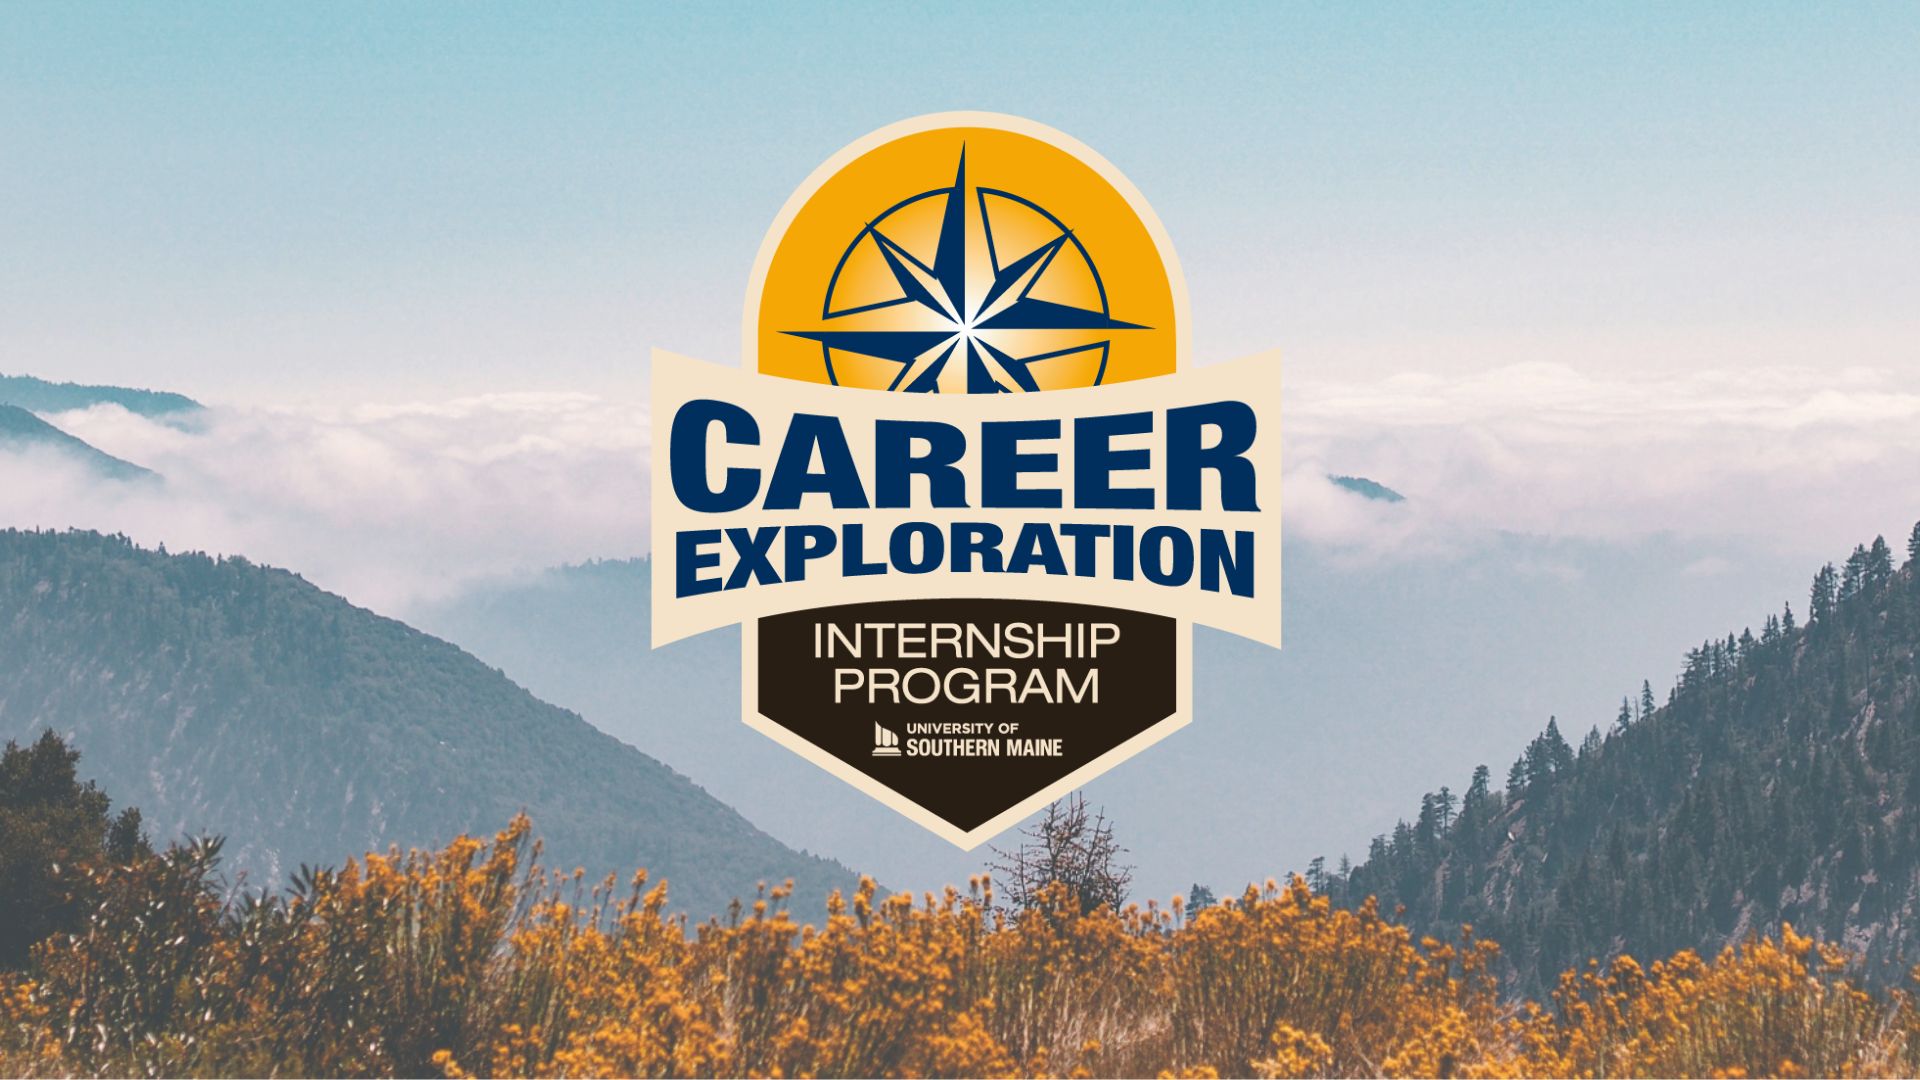 Image of the Career Exploration Internship Program logo in front of a background picture of mountains.